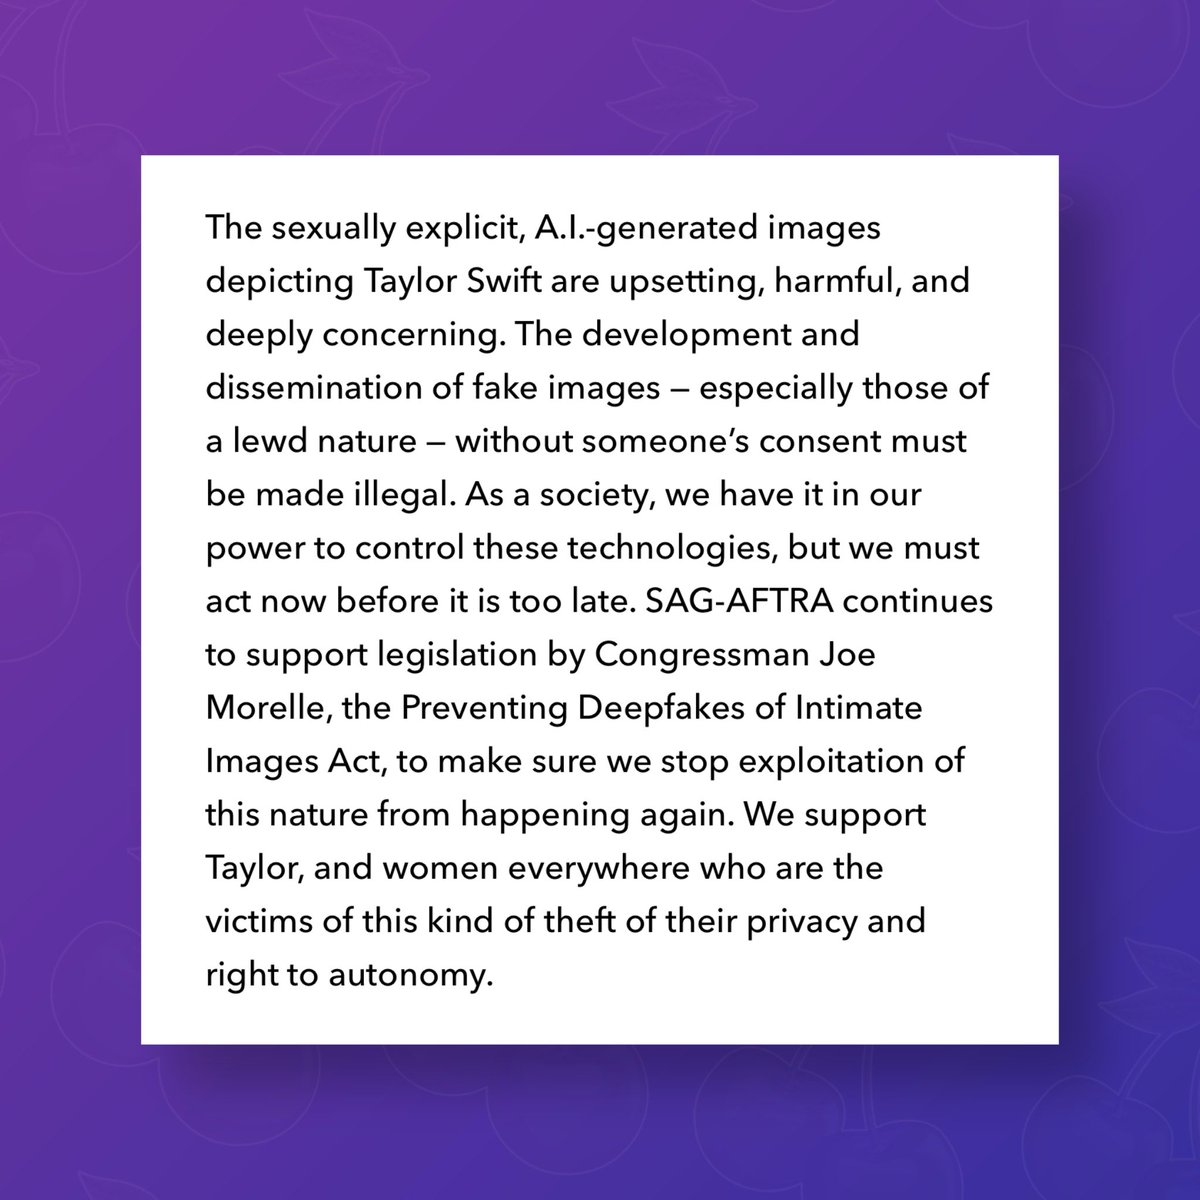 SAG-AFTRA releases statement on Taylor Swift AI-generated images: “As a society, we have it in our power to control these technologies, but we must act now before it is too late.”